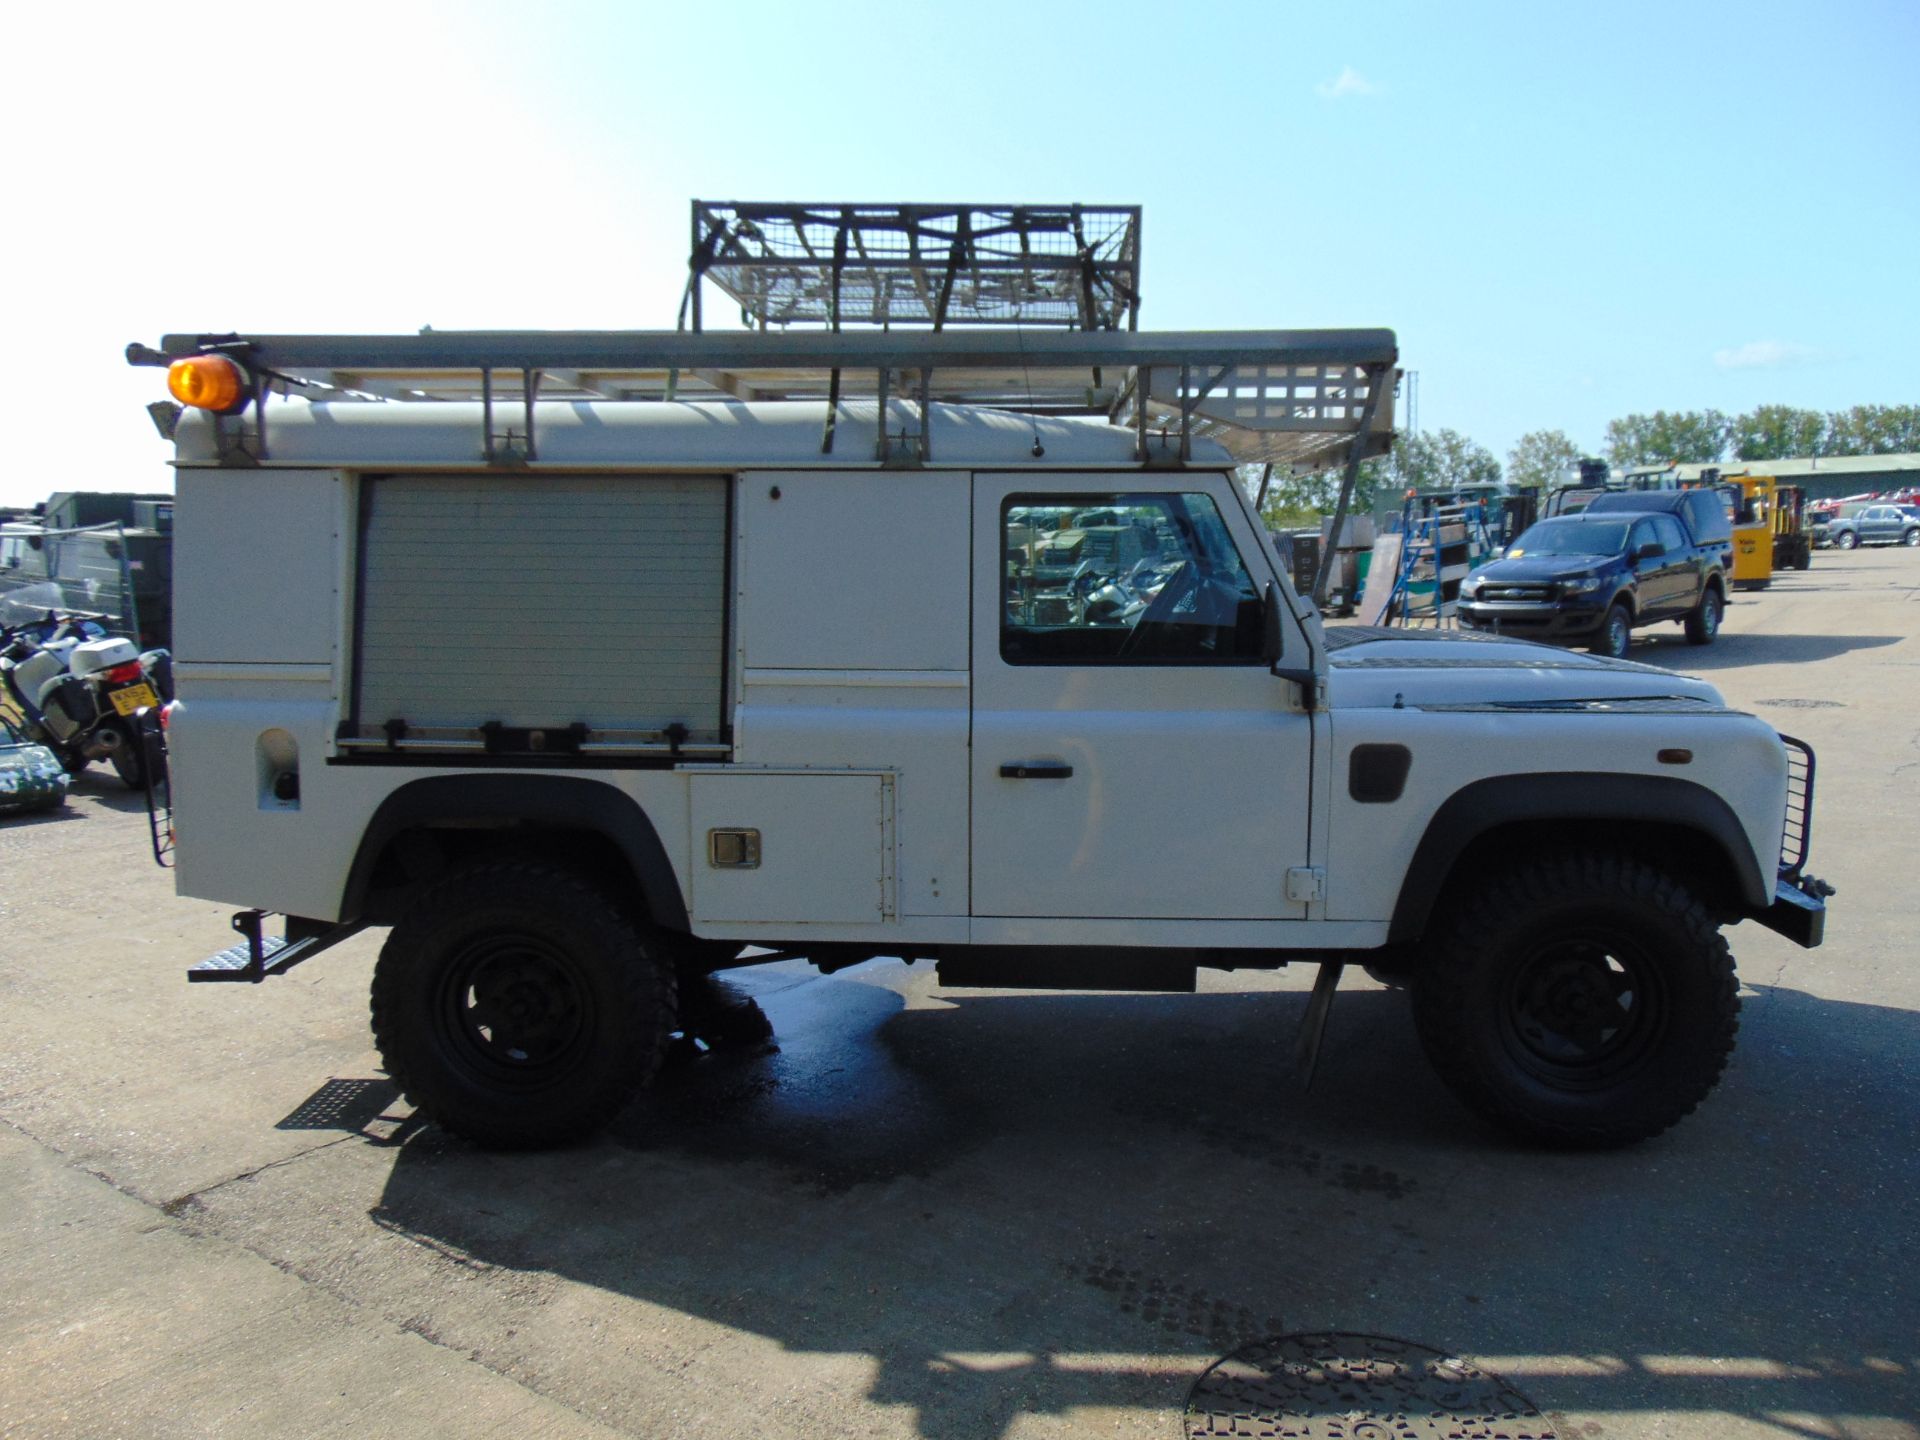 2011 Land Rover Defender 110 Puma hardtop 4x4 Utility vehicle (mobile workshop) with hydraulic winch - Image 6 of 53